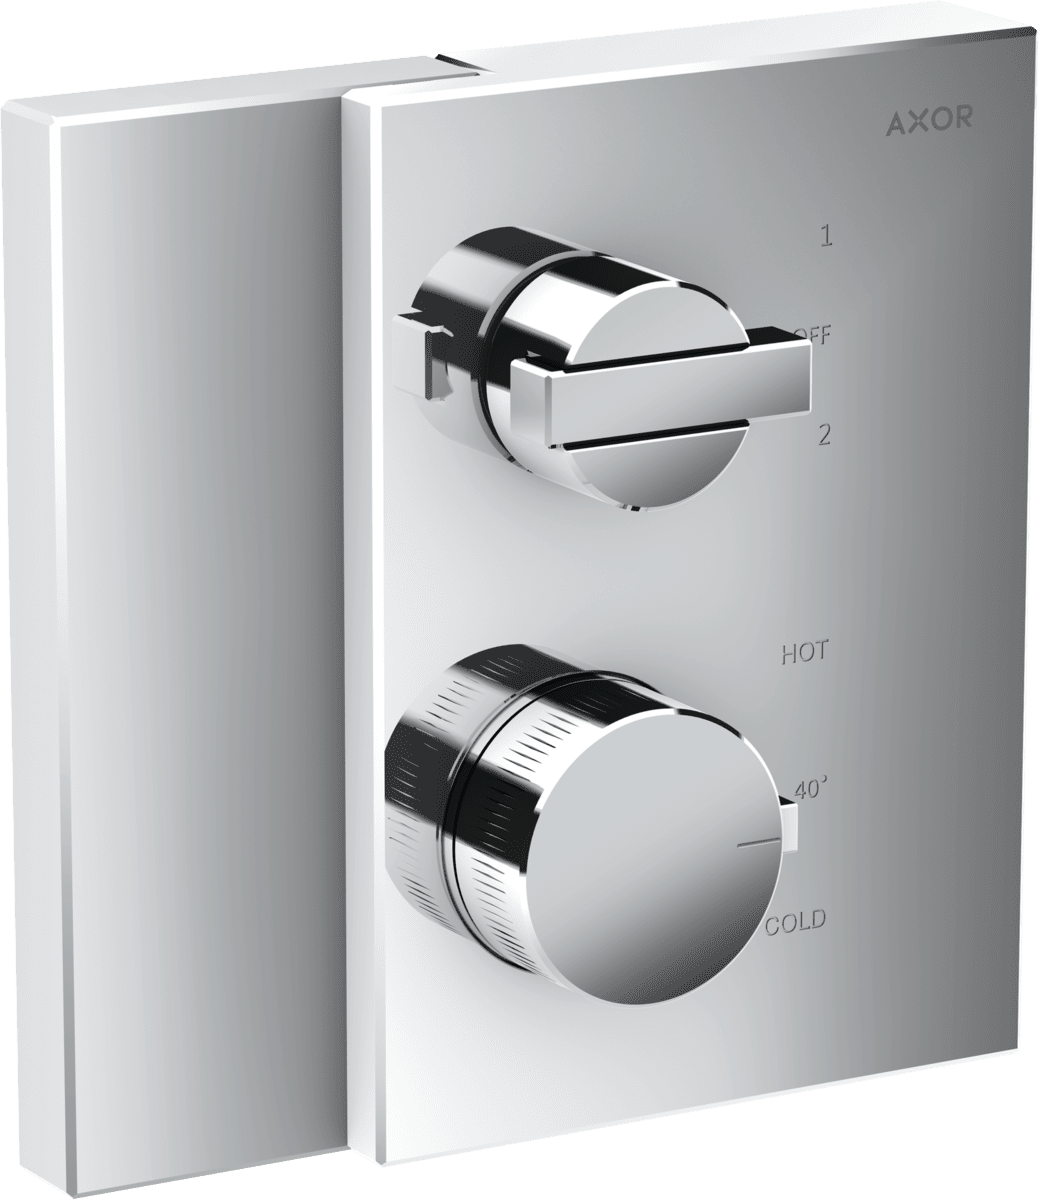 Picture of HANSGROHE AXOR Edge Thermostat for concealed installation with shut-off/ diverter valve #46760000 - Chrome